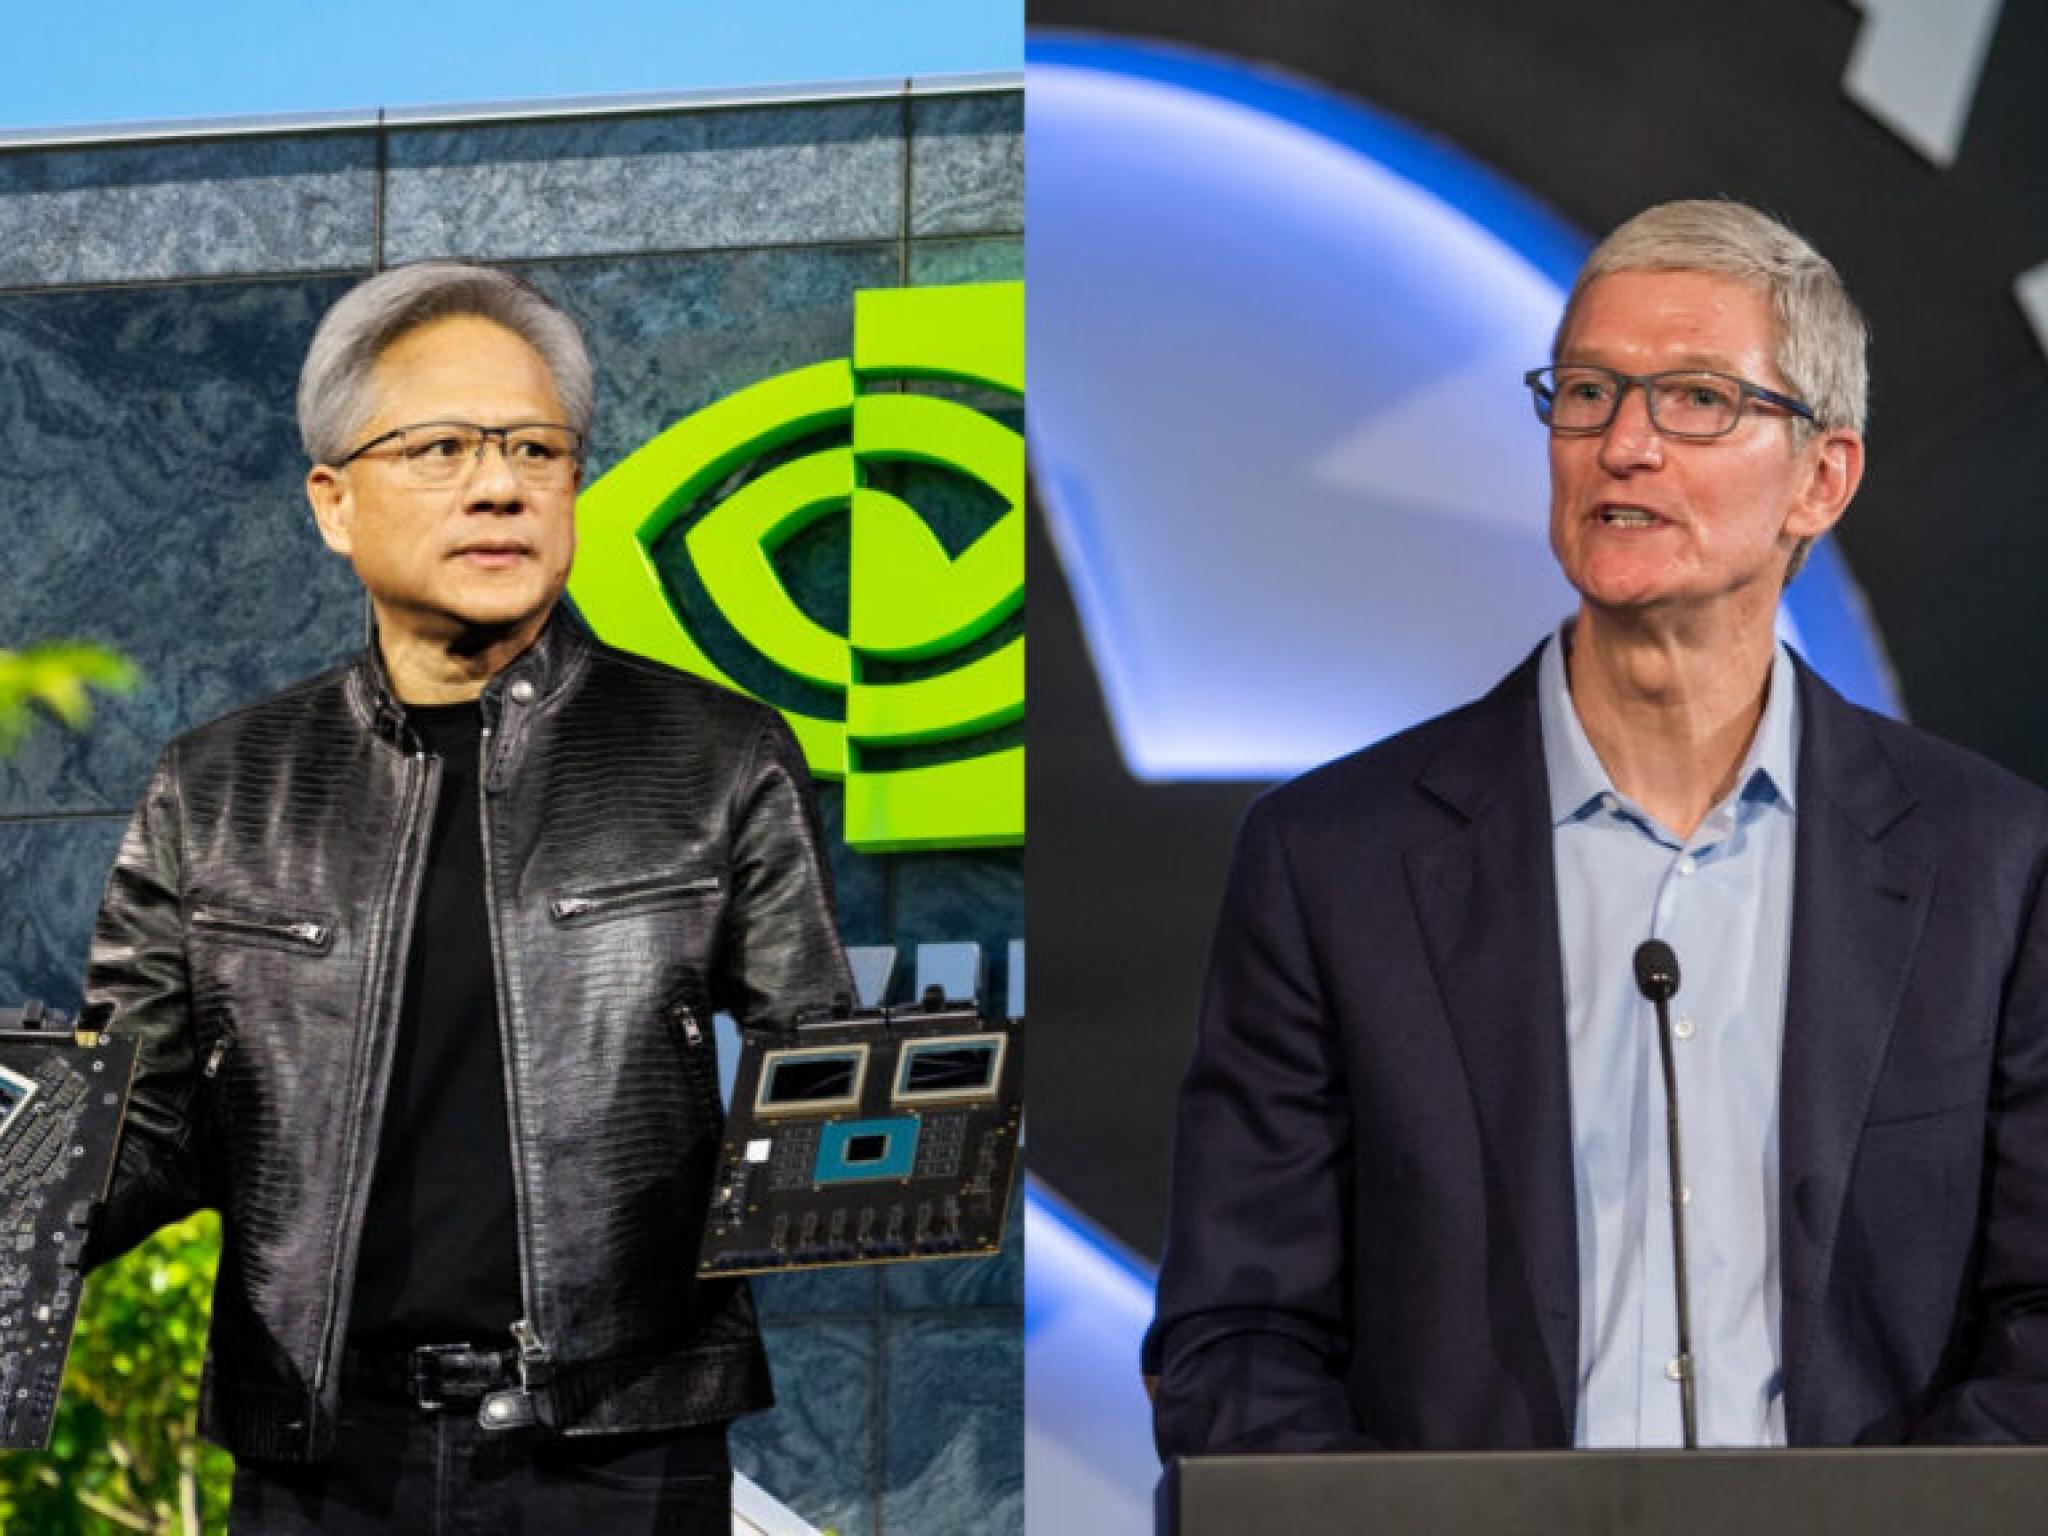  dan-niles-predicts-so-much-more-growth-for-nvidia-as-jensen-huang-led-tech-giant-surpasses-apple-if-i-have-to-pick-one-to-own-for-the-next-couple-of-years 